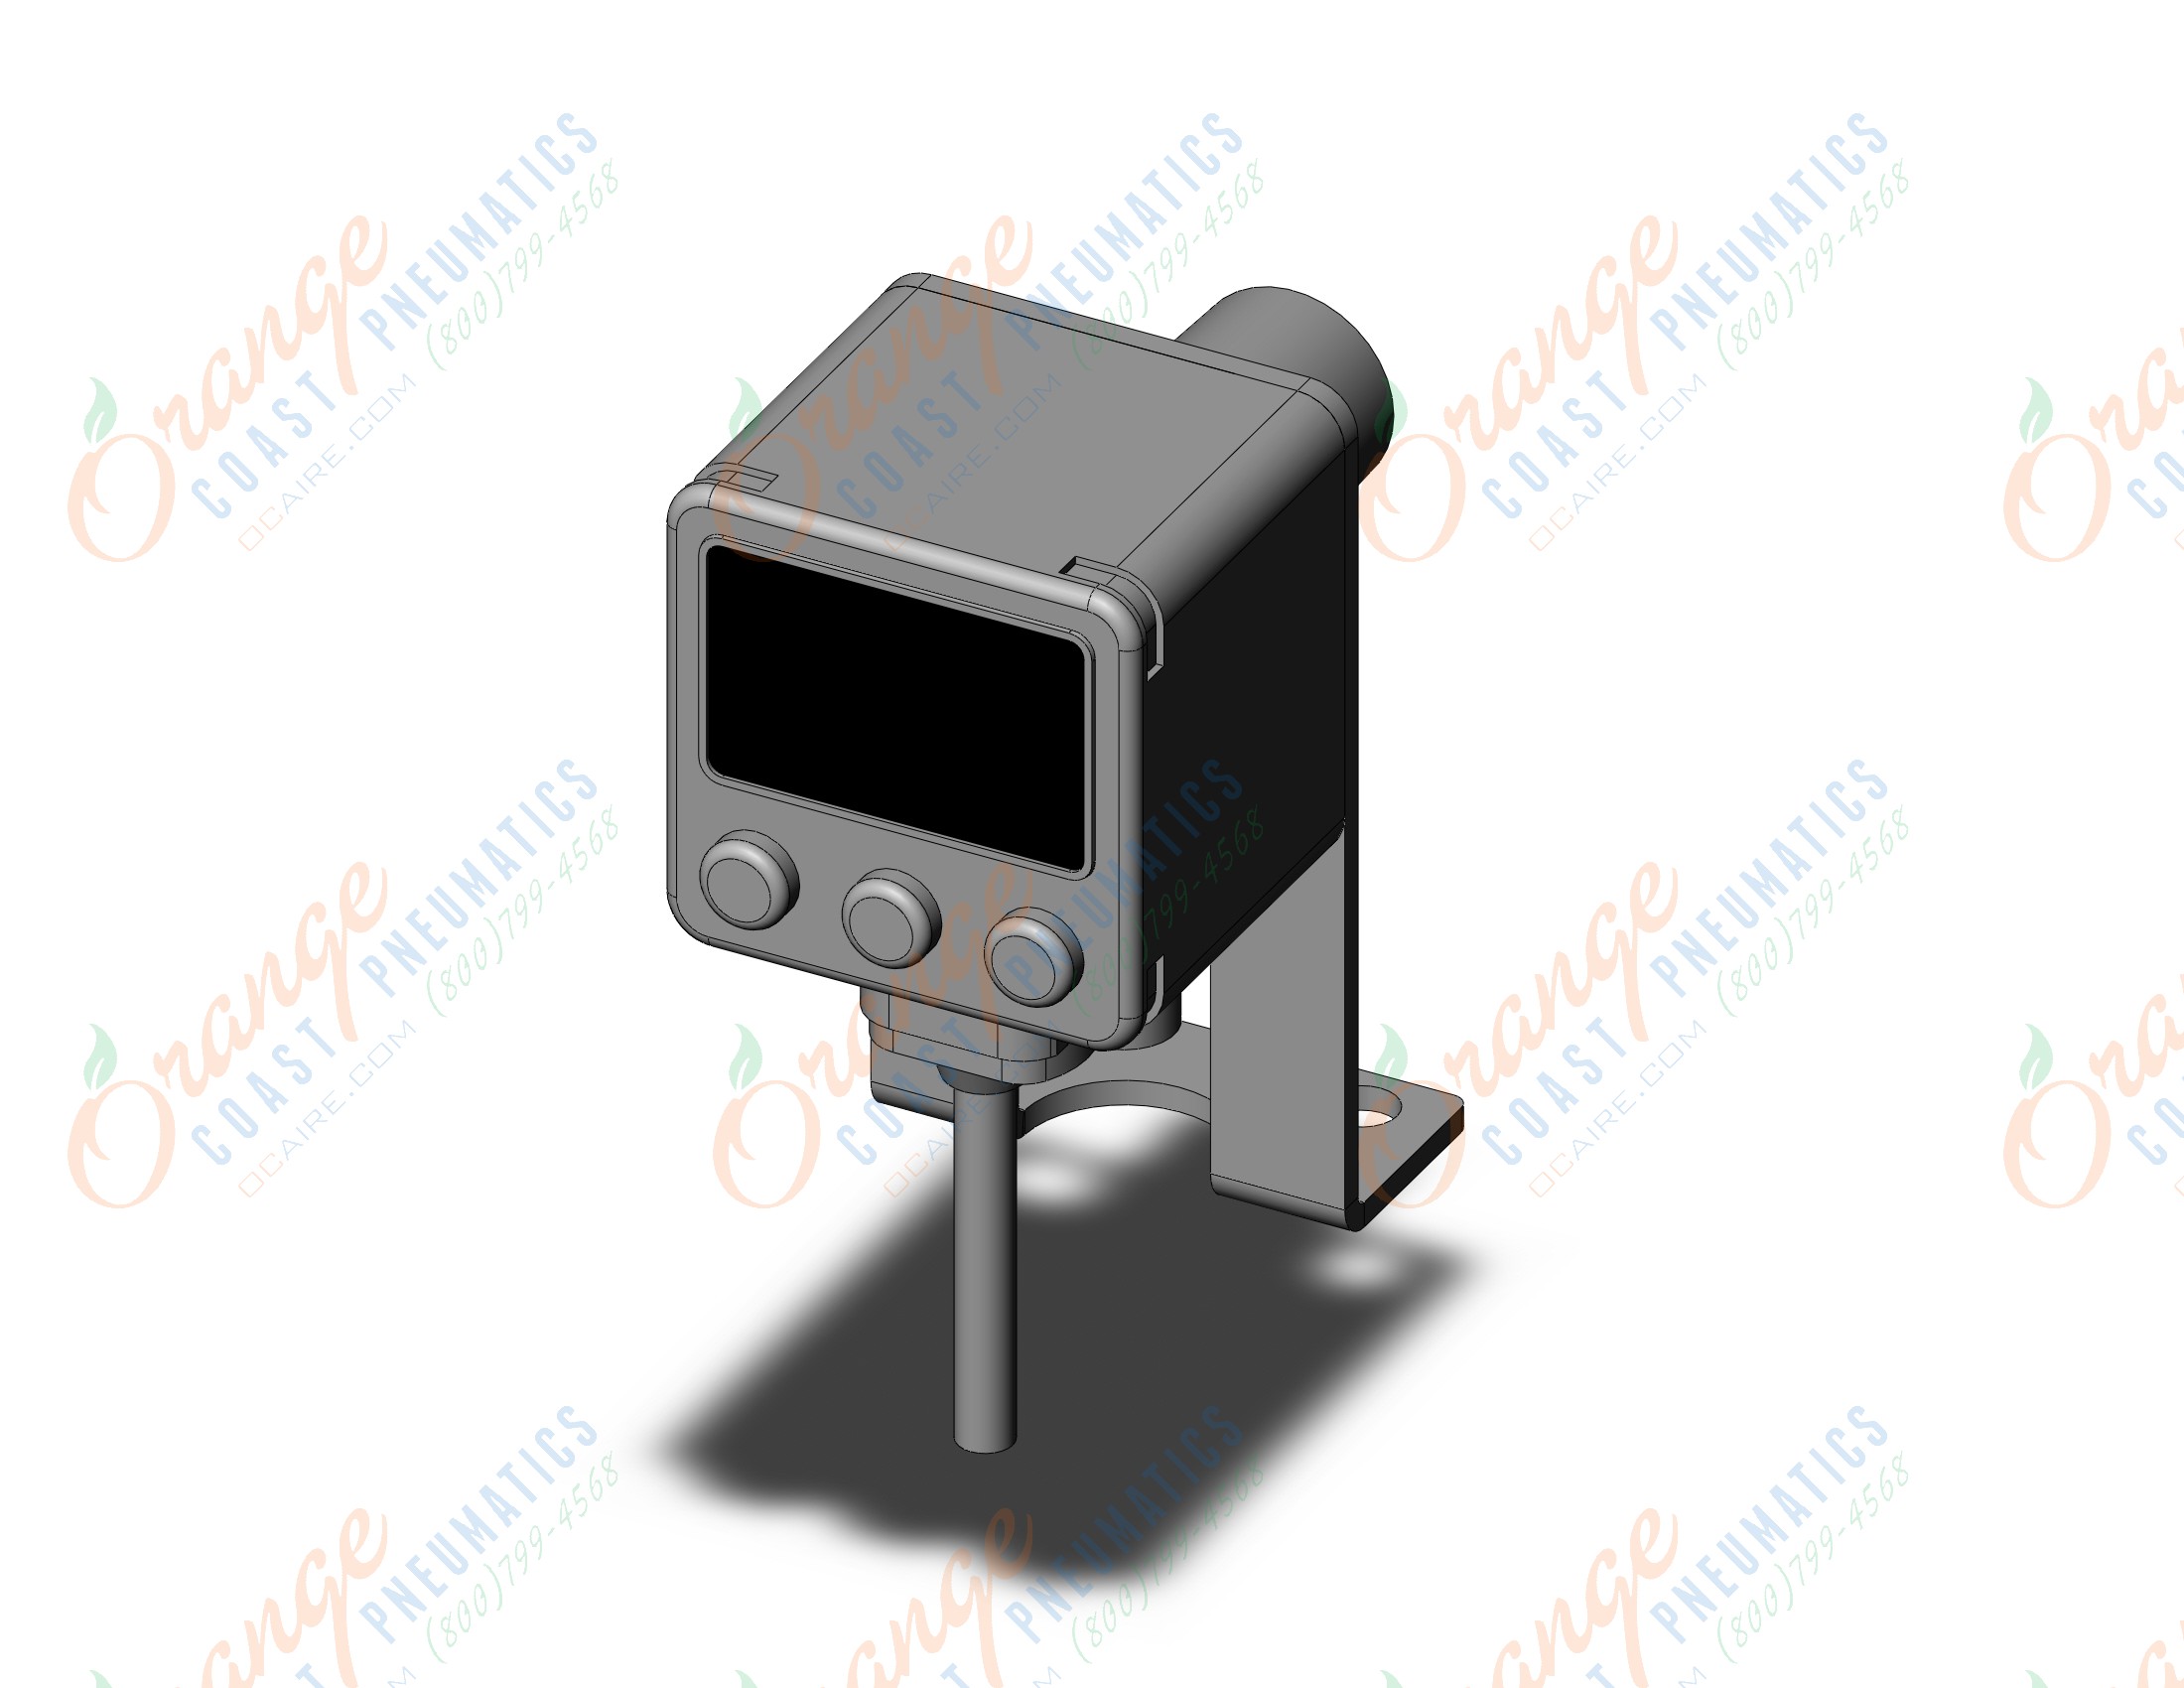 SMC ISE80H-N02-B-PA-X501 ise40/50/60 1/4" npt version, ISE40/50/60 PRESSURE SWITCH